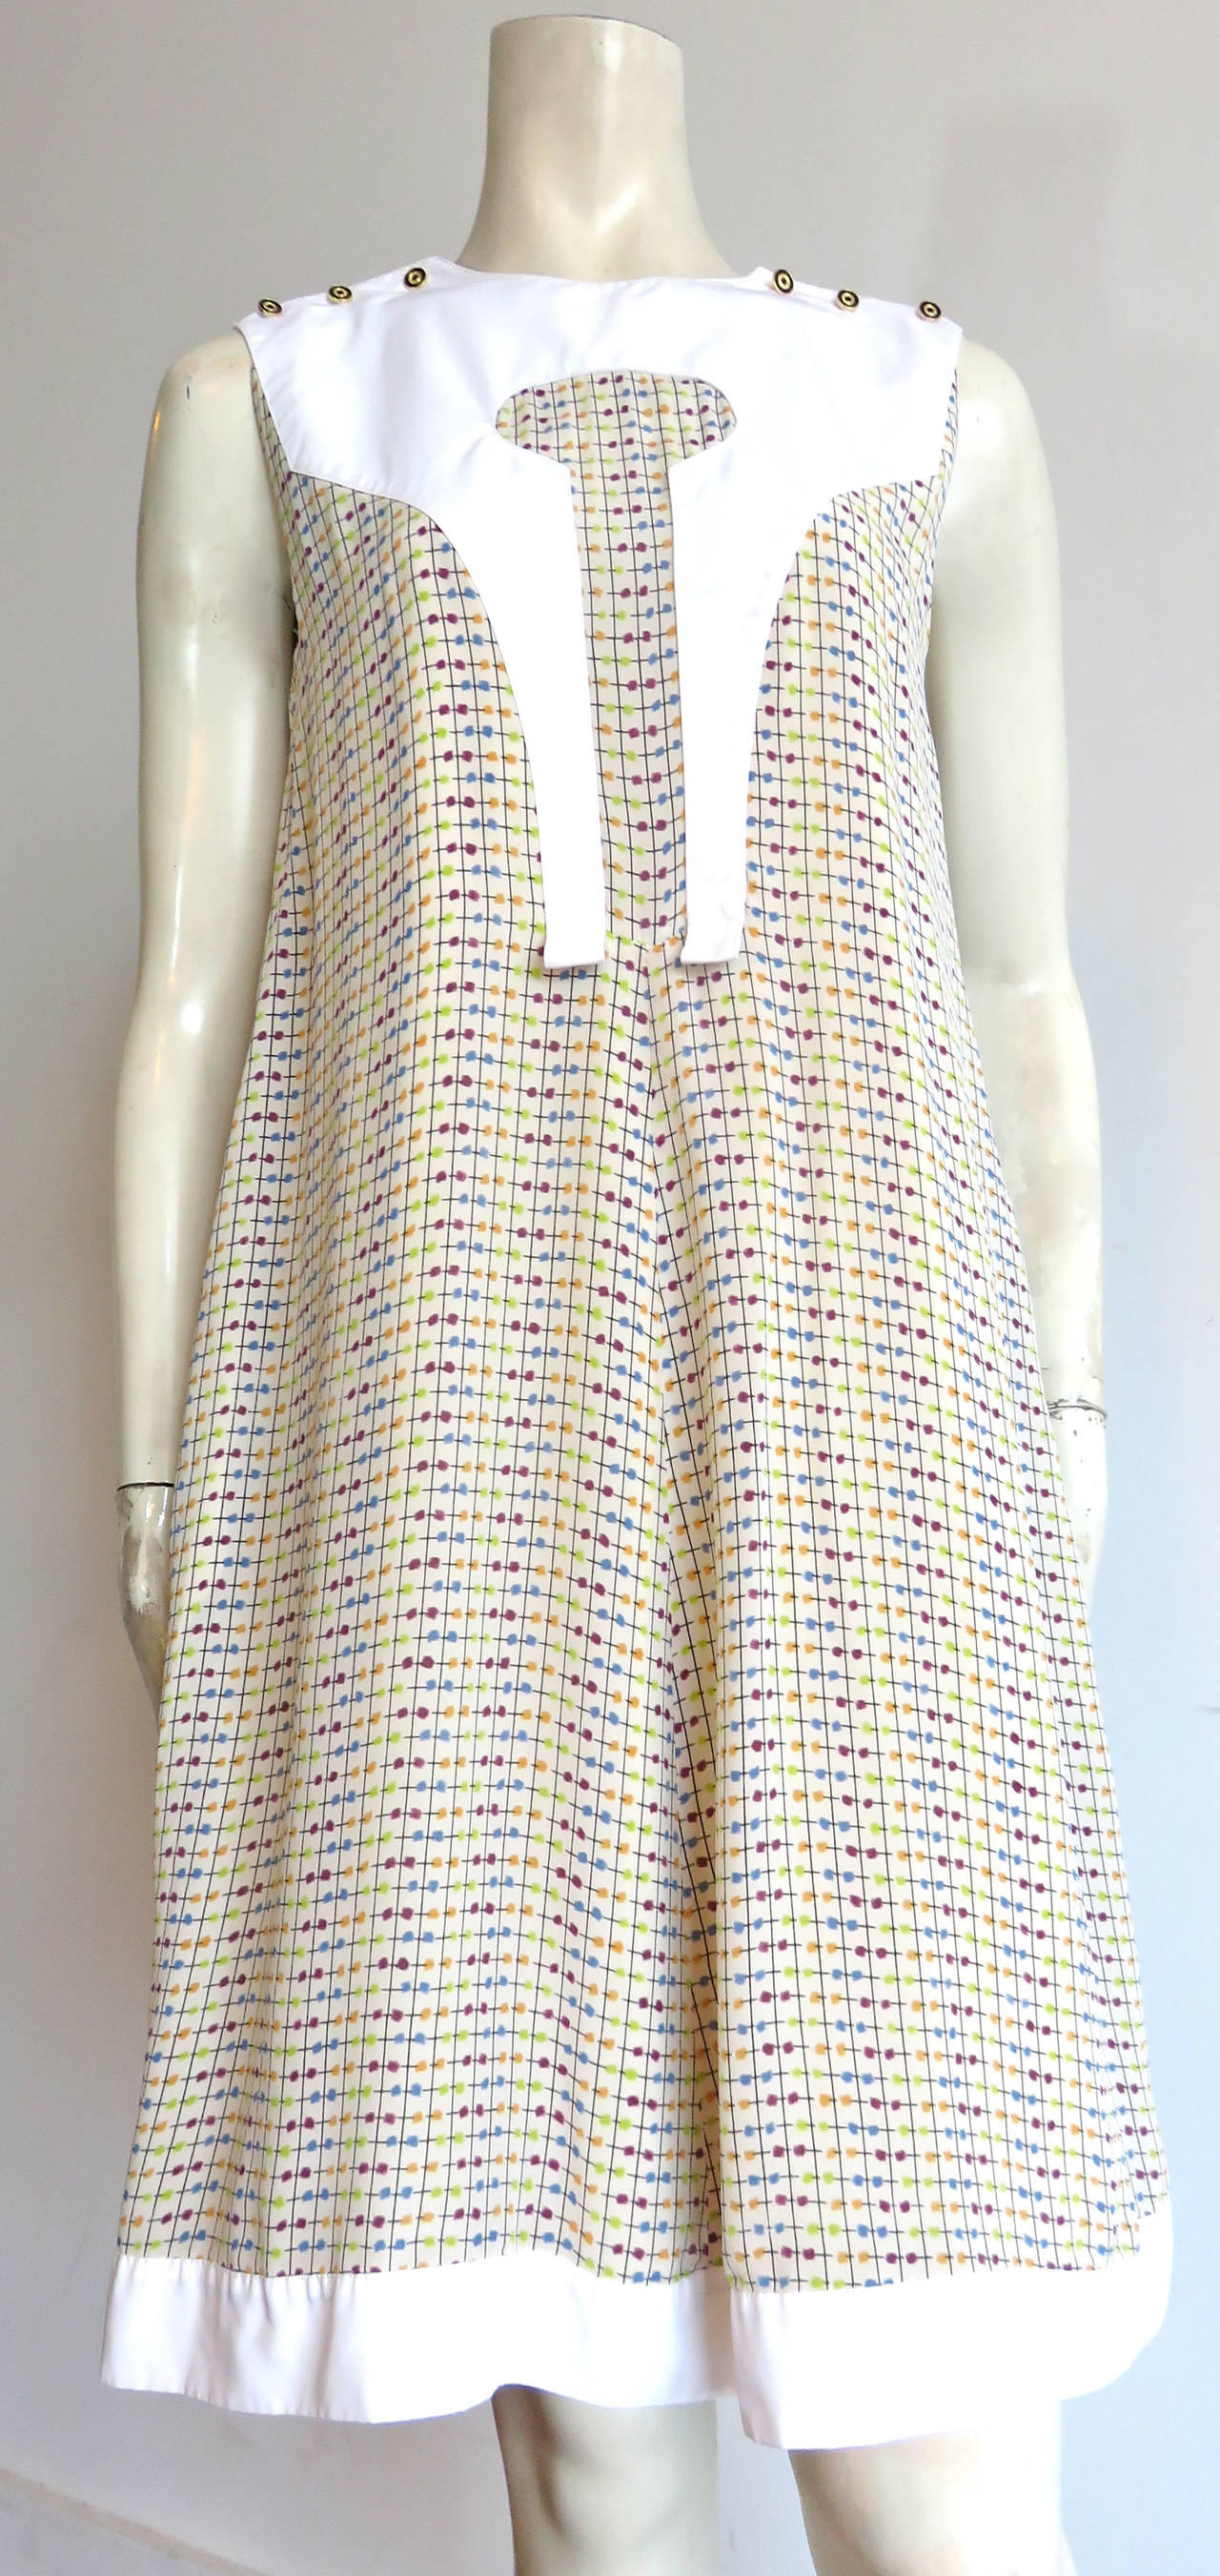 Excellent condition, FENDI, printed silk crepe, 'A'-line, flared shift dress with solid white, block paneling.

Novelty, enamel and metal shoulder button through detailing.

Printed silk crepe fabrication featuring multi-color, check grid